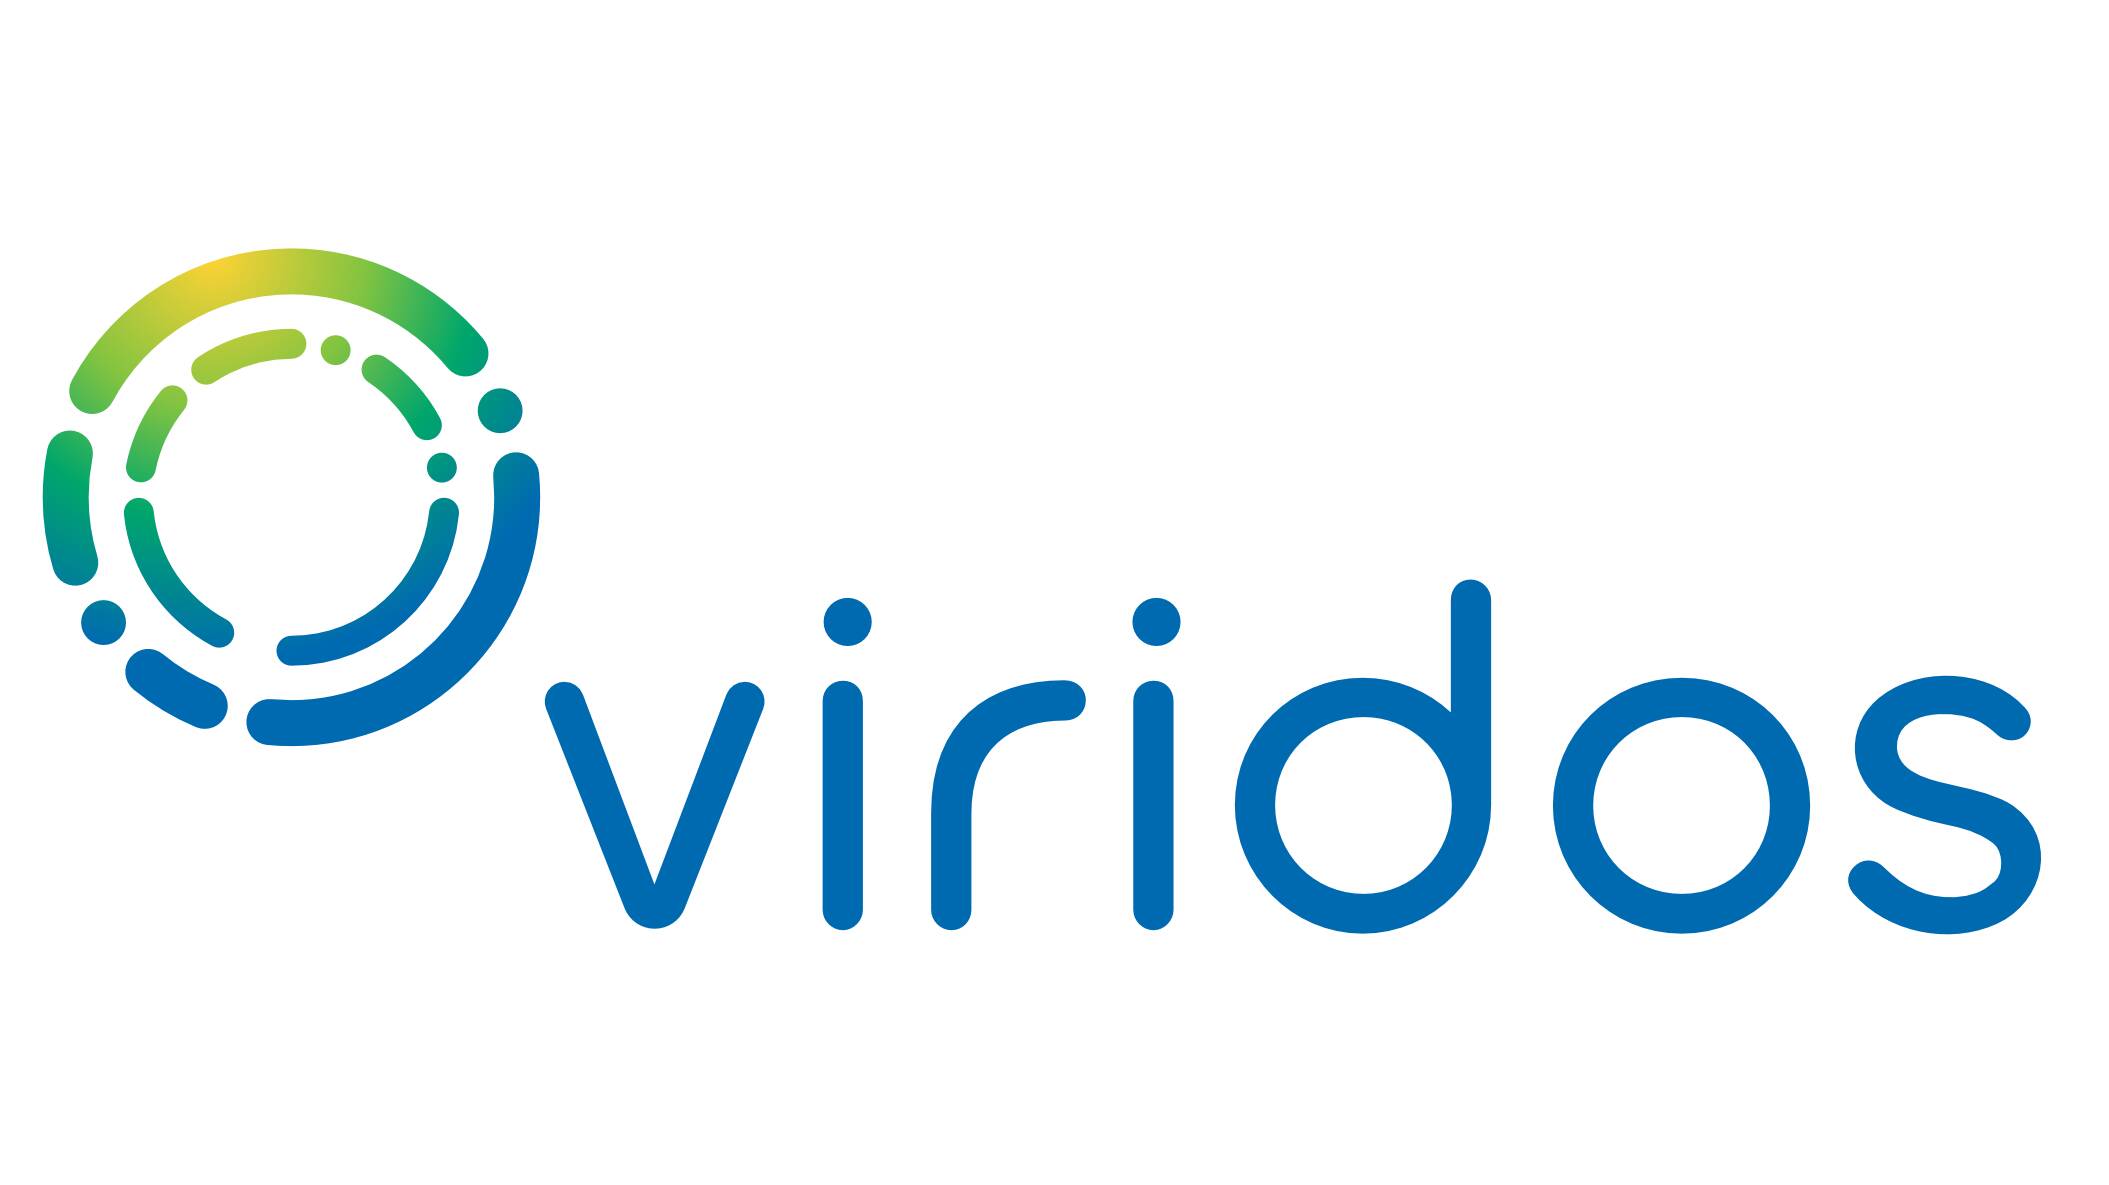 Viridos is employing synthetic biology techniques and exploring other fundamental science to develop highly productive algae strains.